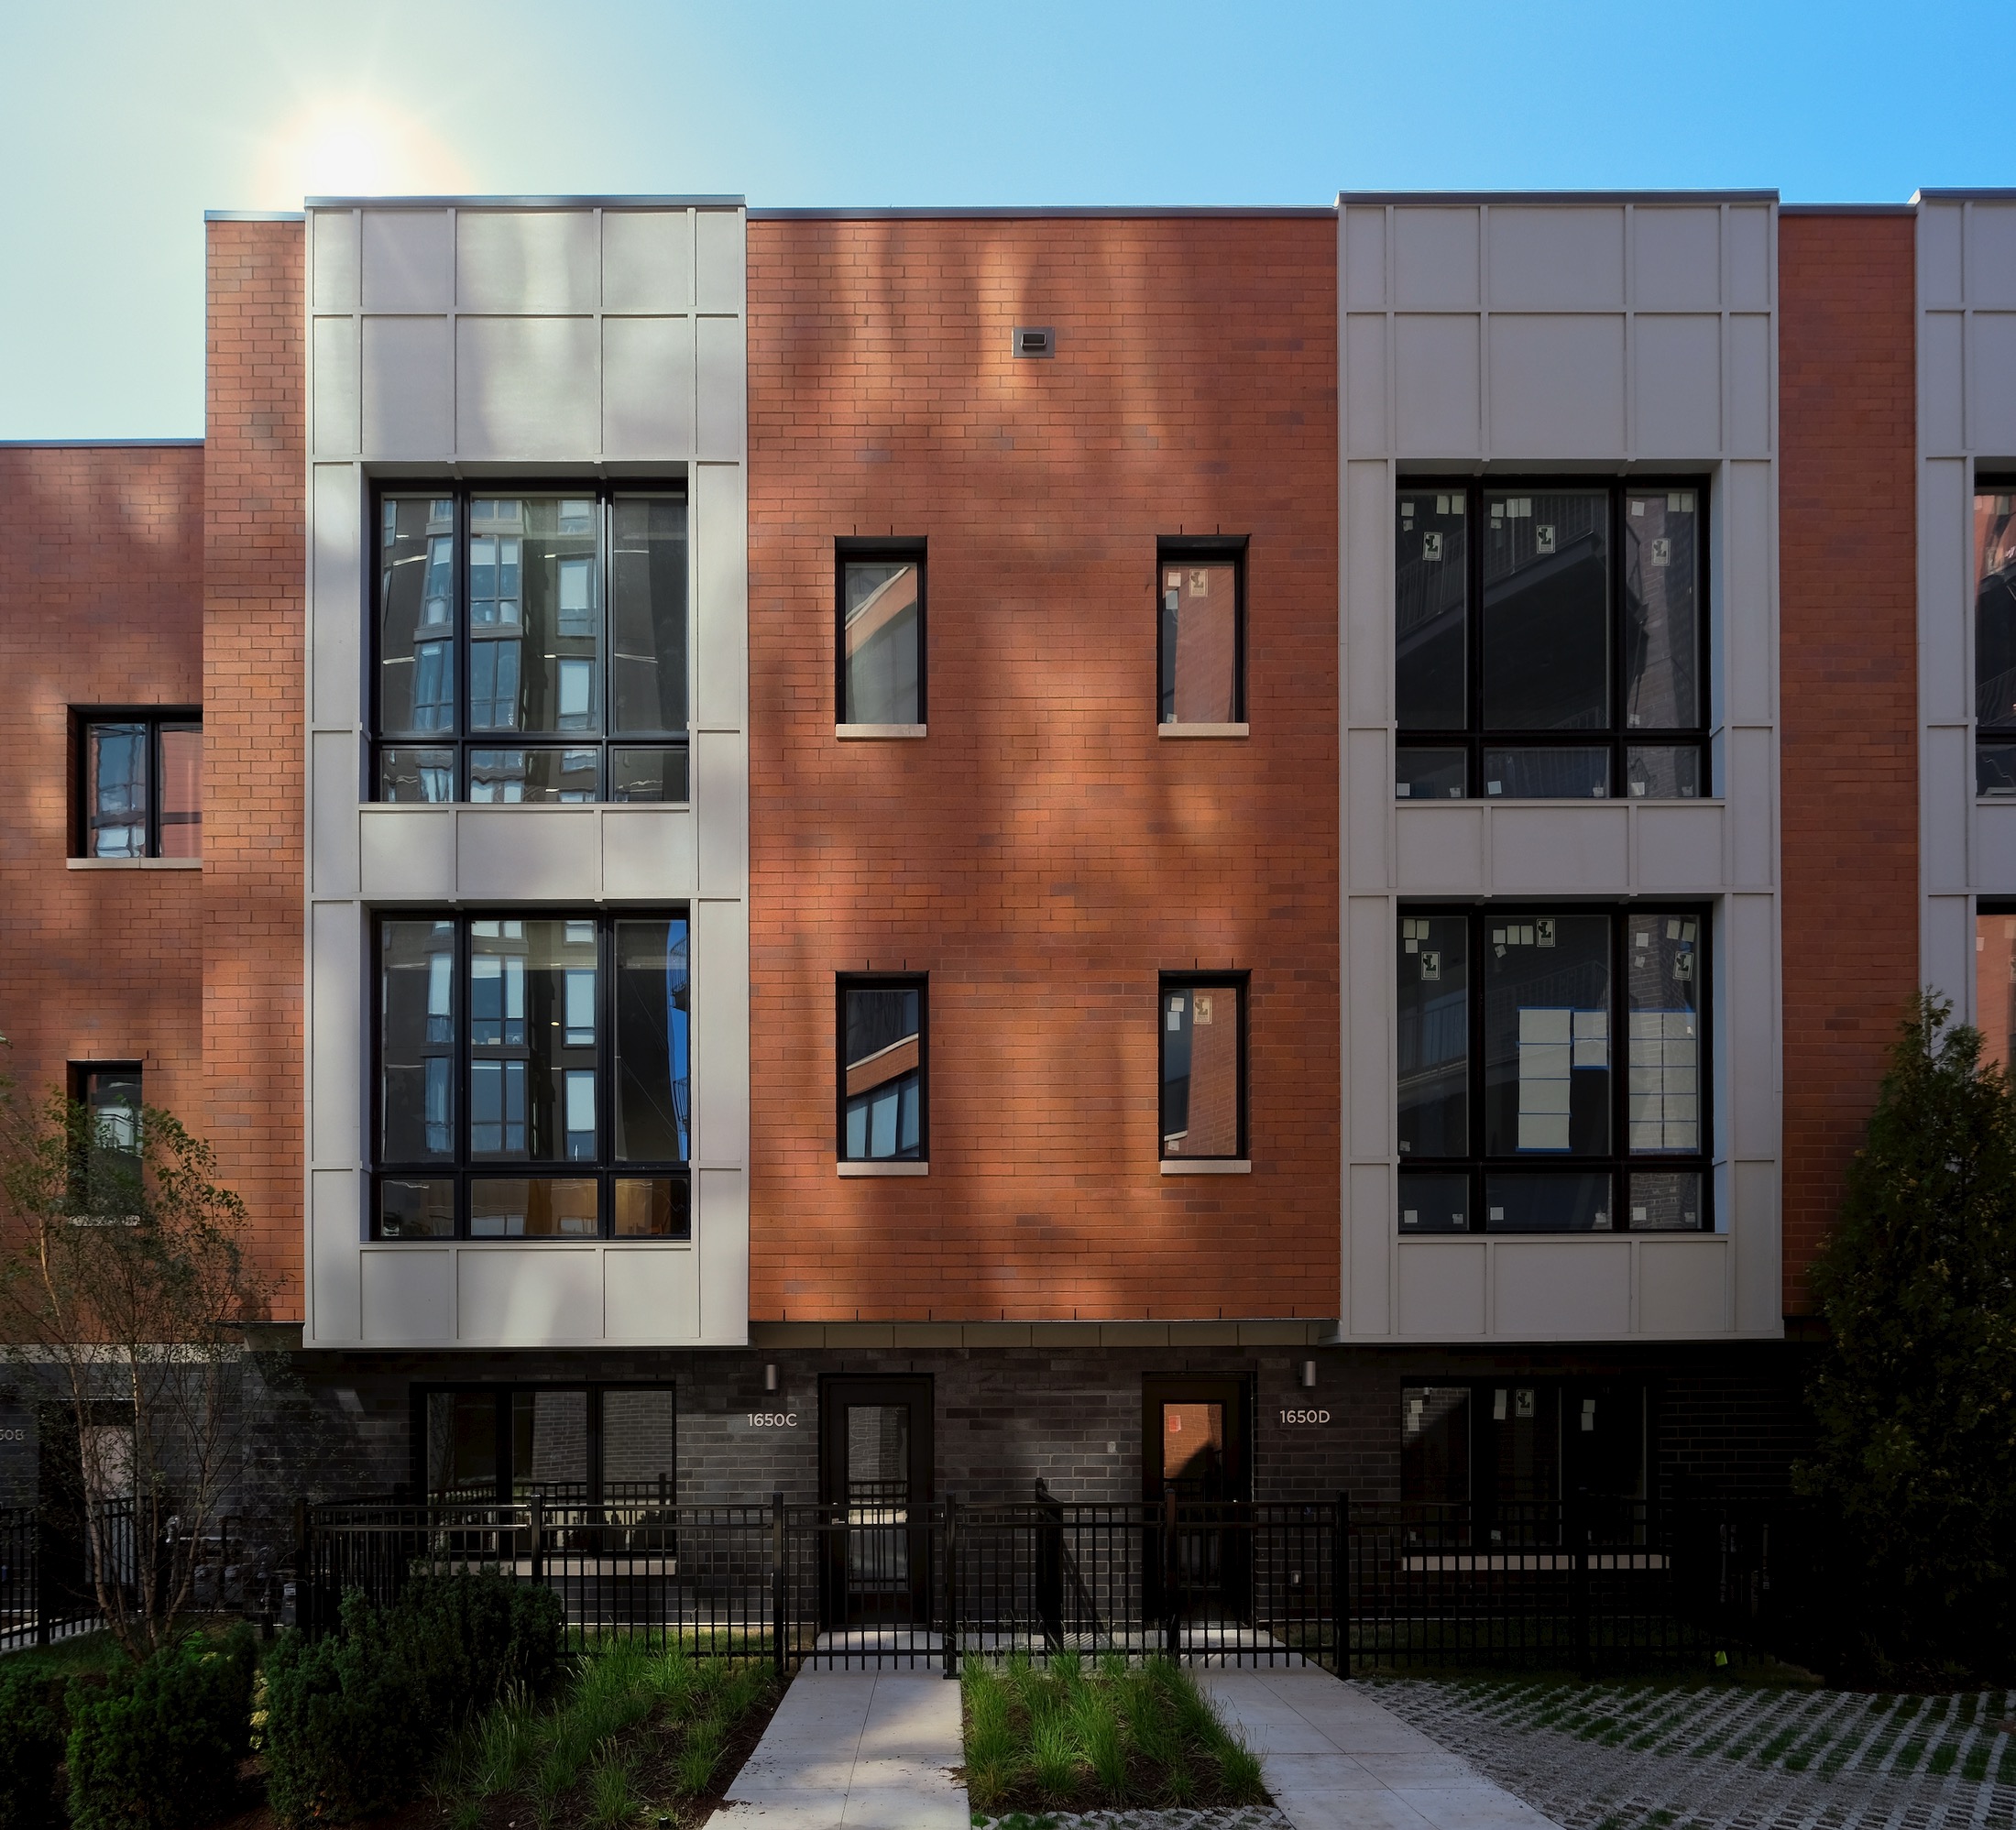 Alcove Wicker Park townhomes